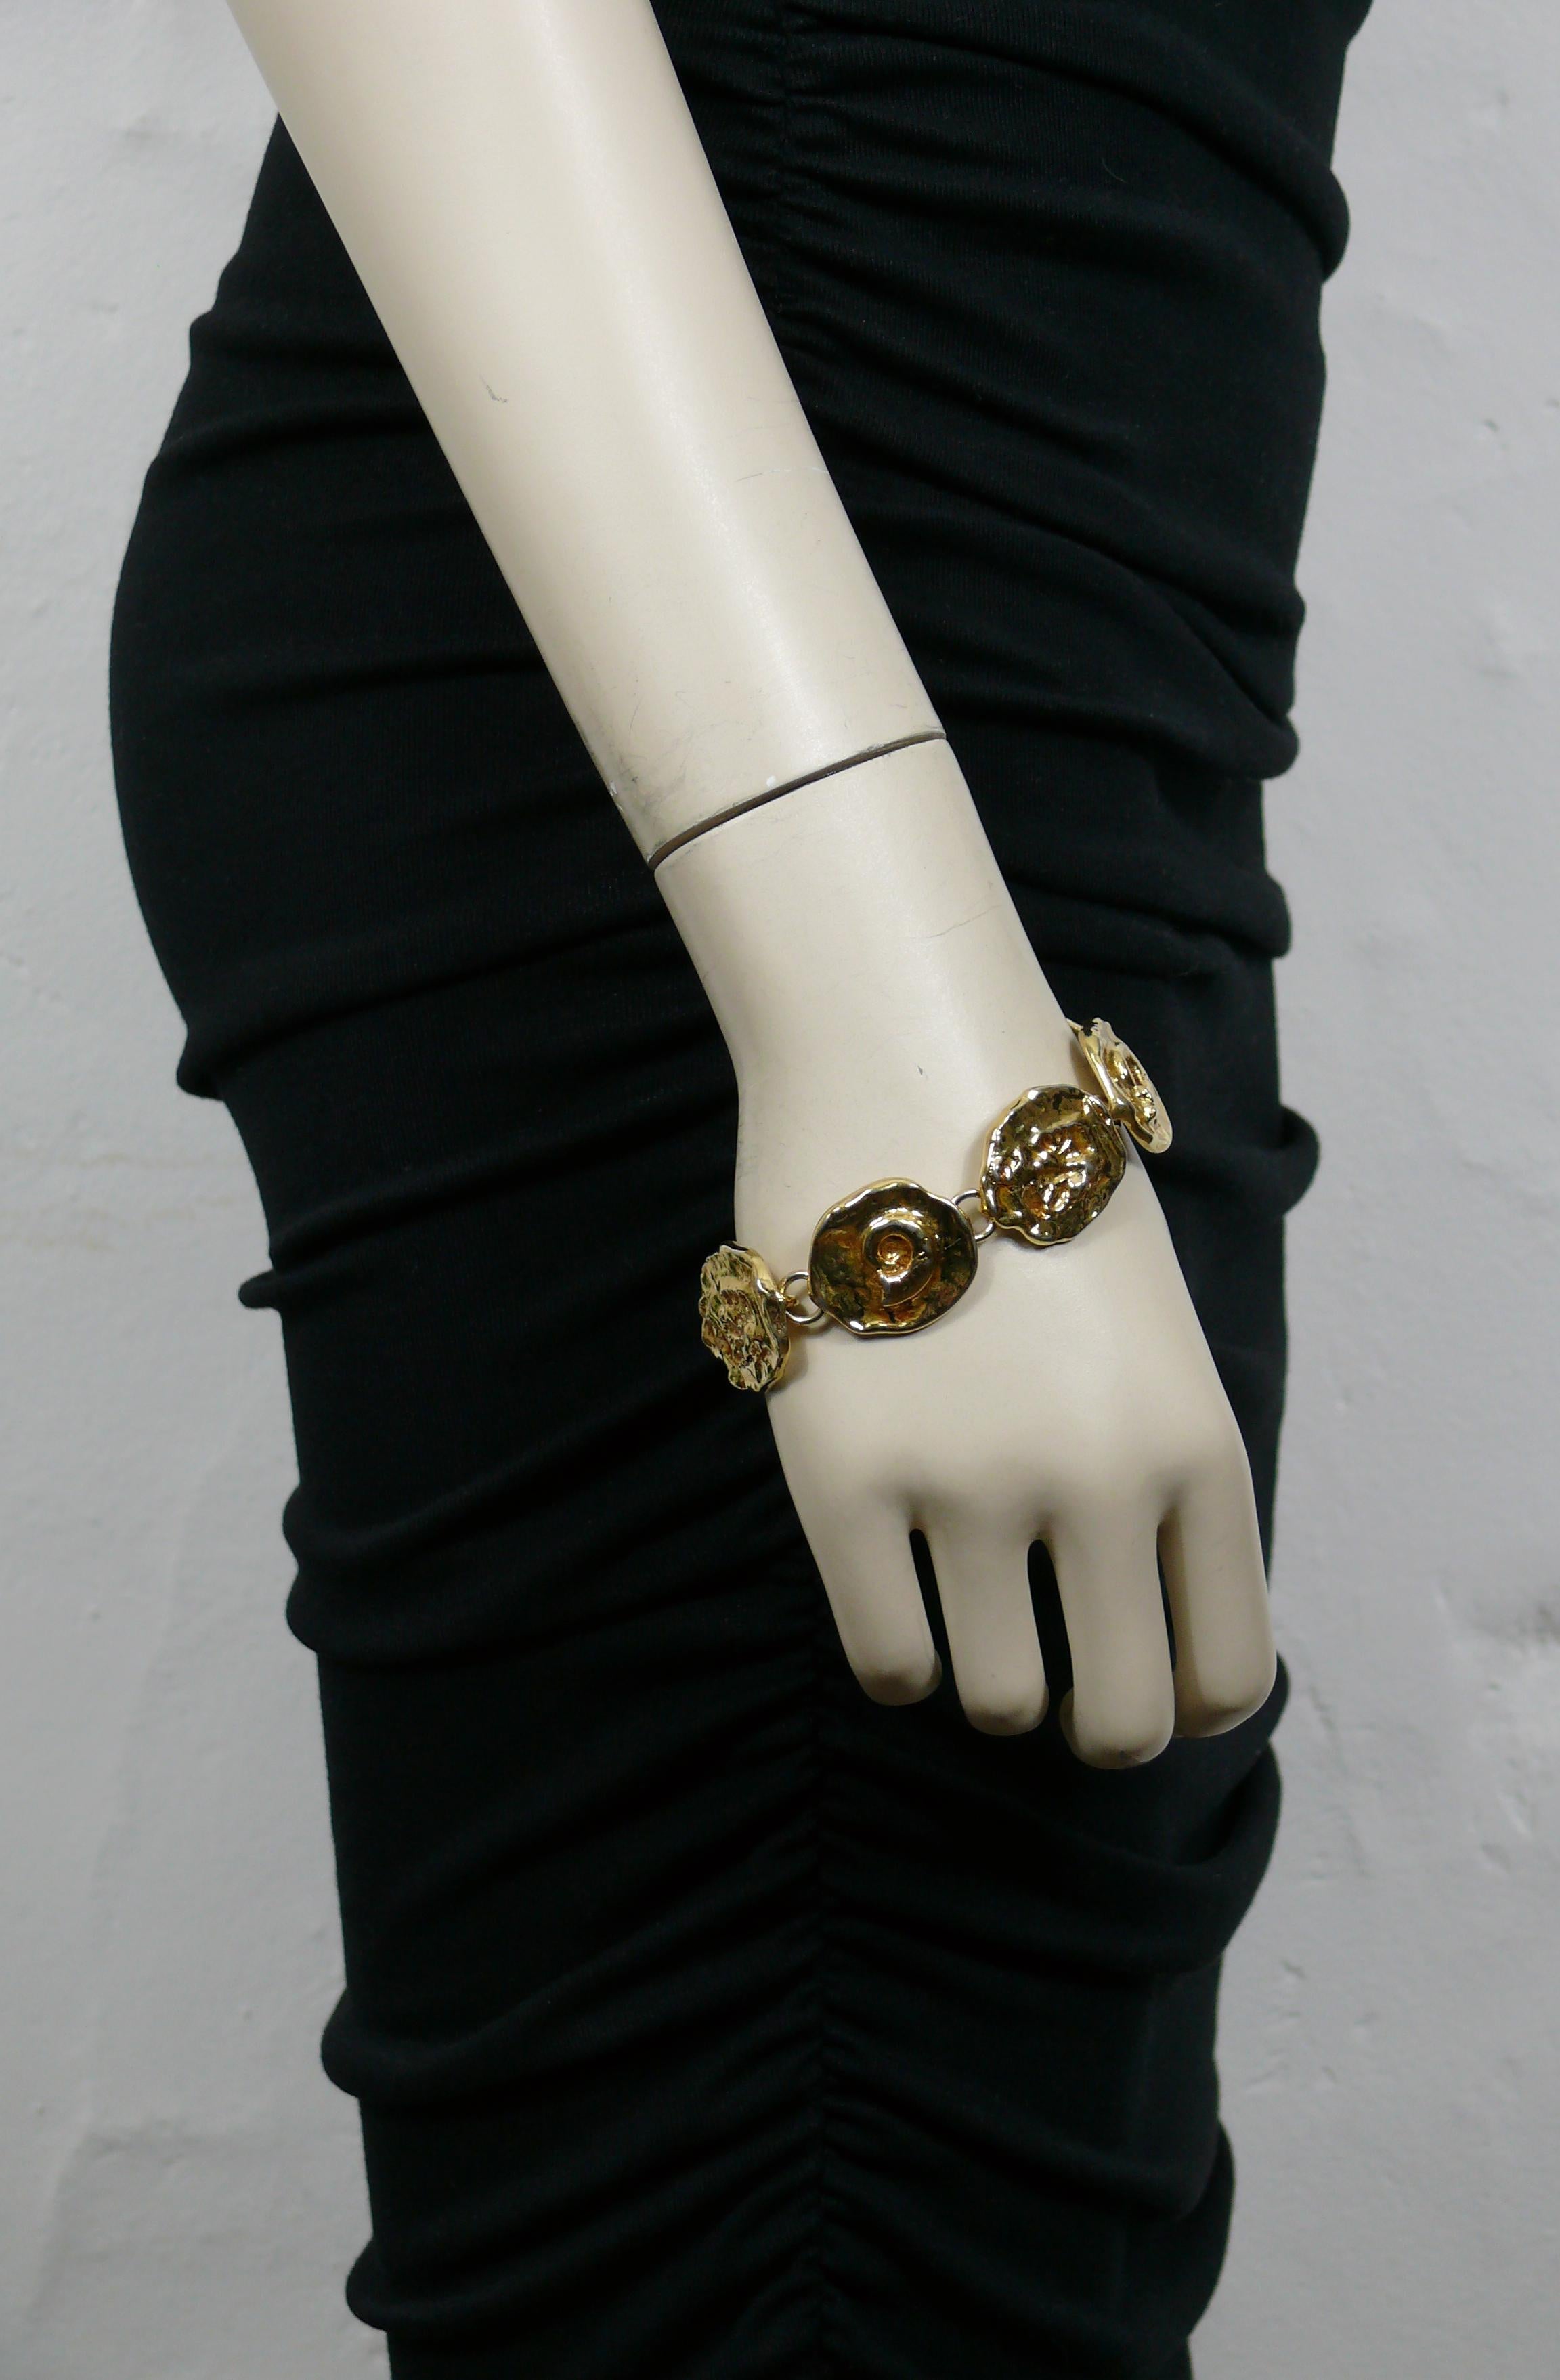 YVES SAINT LAURENT vintage gold tone bracelet featuring fossil motif medallion links.

Box clasp closure.

Embossed YSL Made in France.

Indicative measurements : length approx. 20 cm (7.87 inches) / medallion width approx. 2.2 cm (0.87